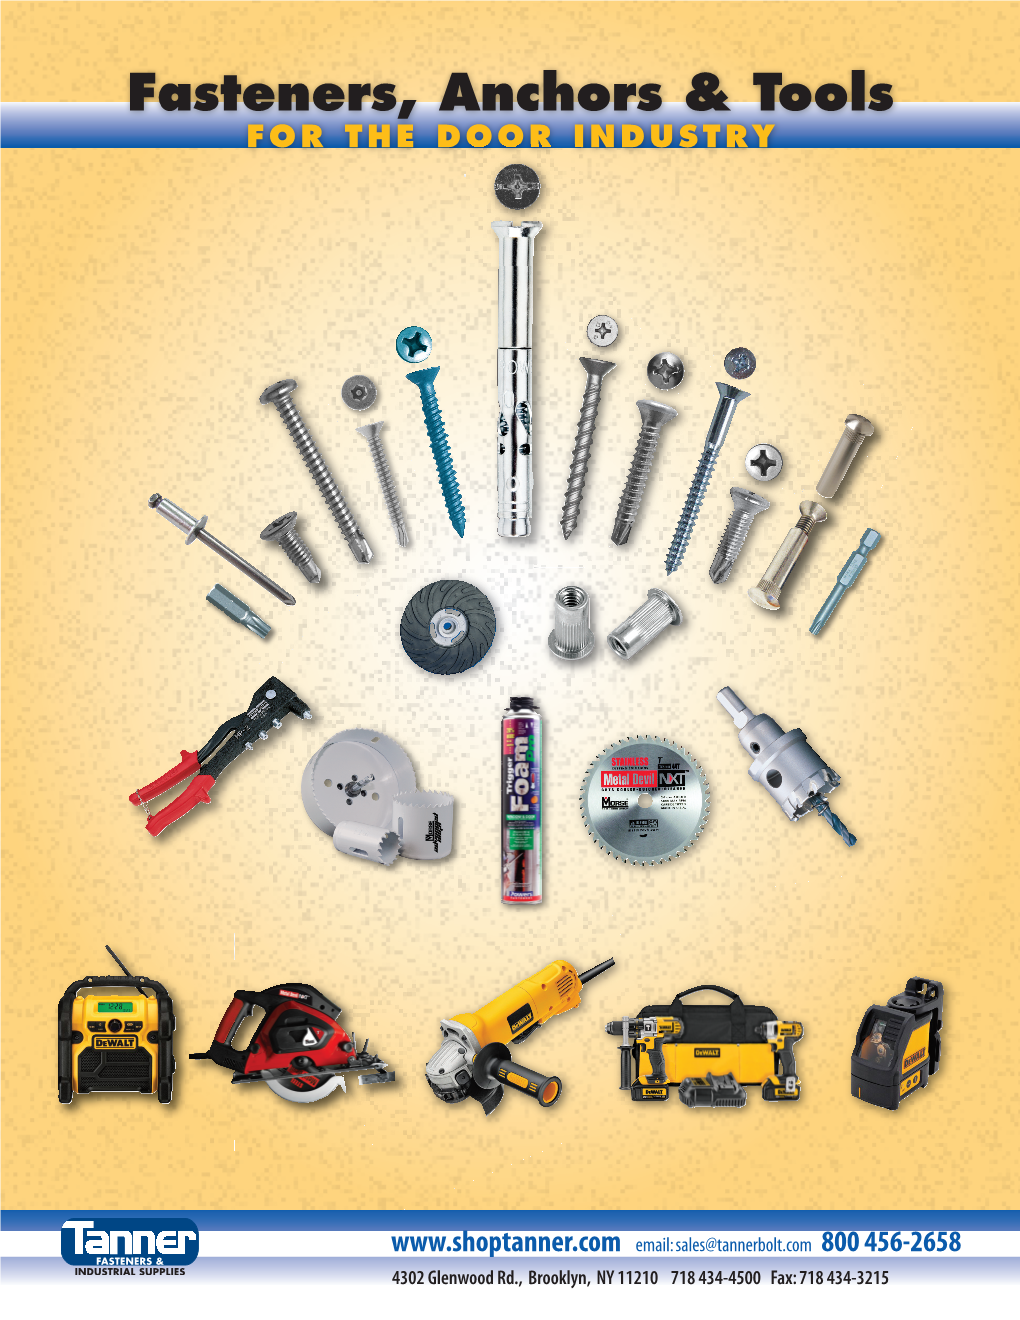 Fasteners, Anchors & Tools